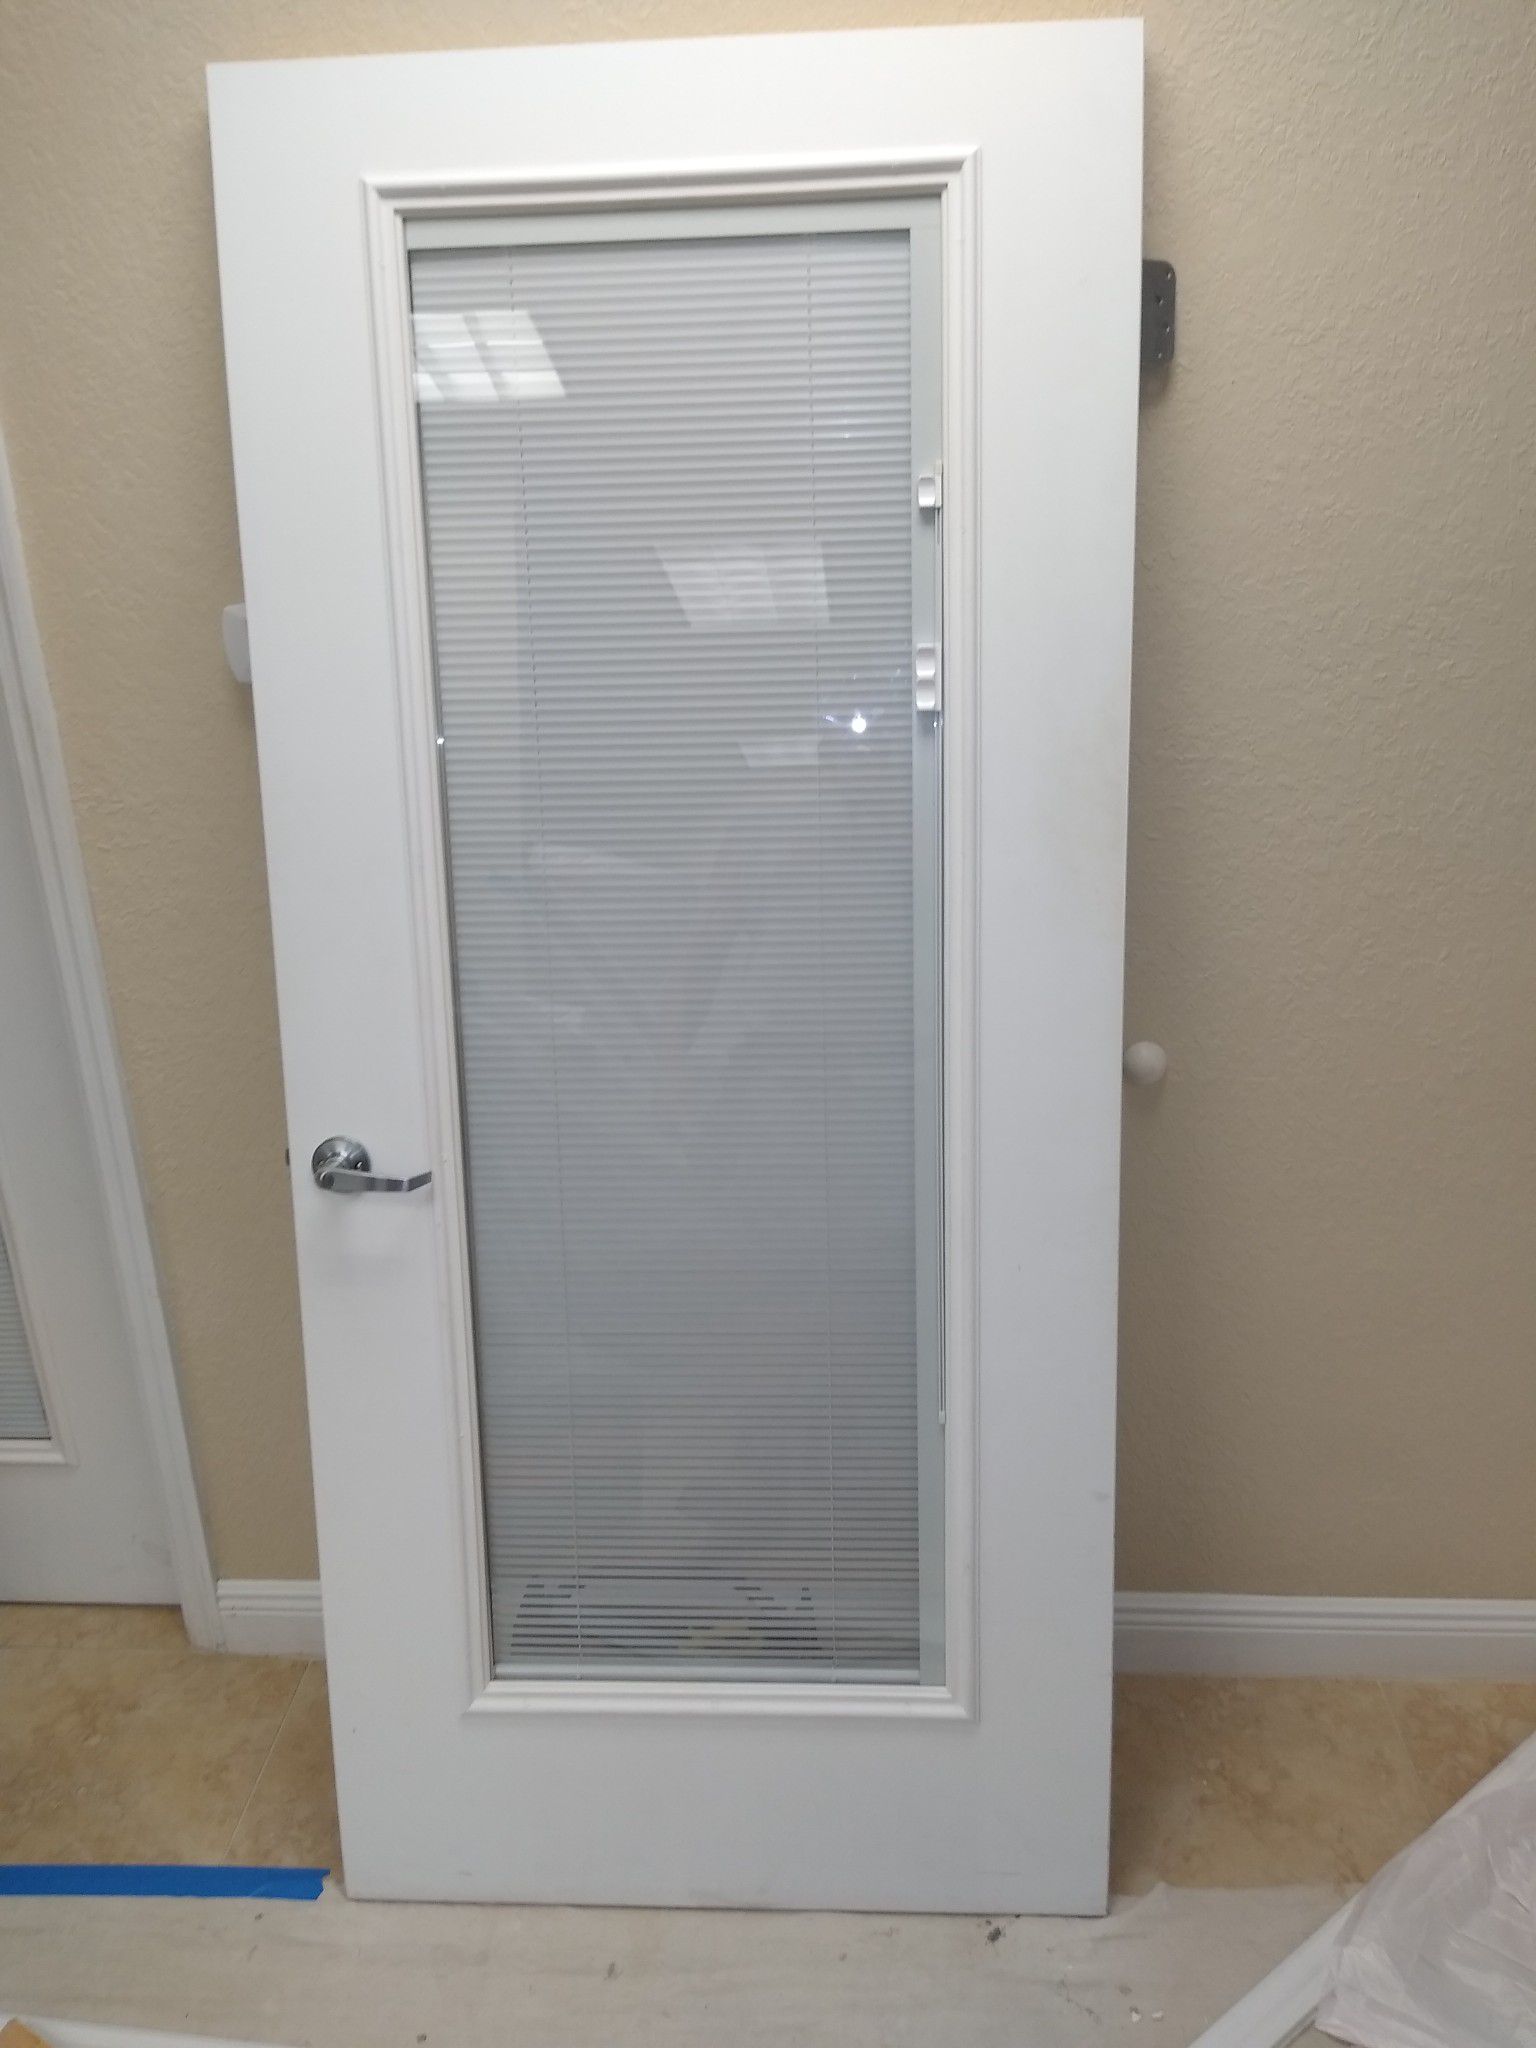 Double door with mini blinds 74.5x81 overall unit